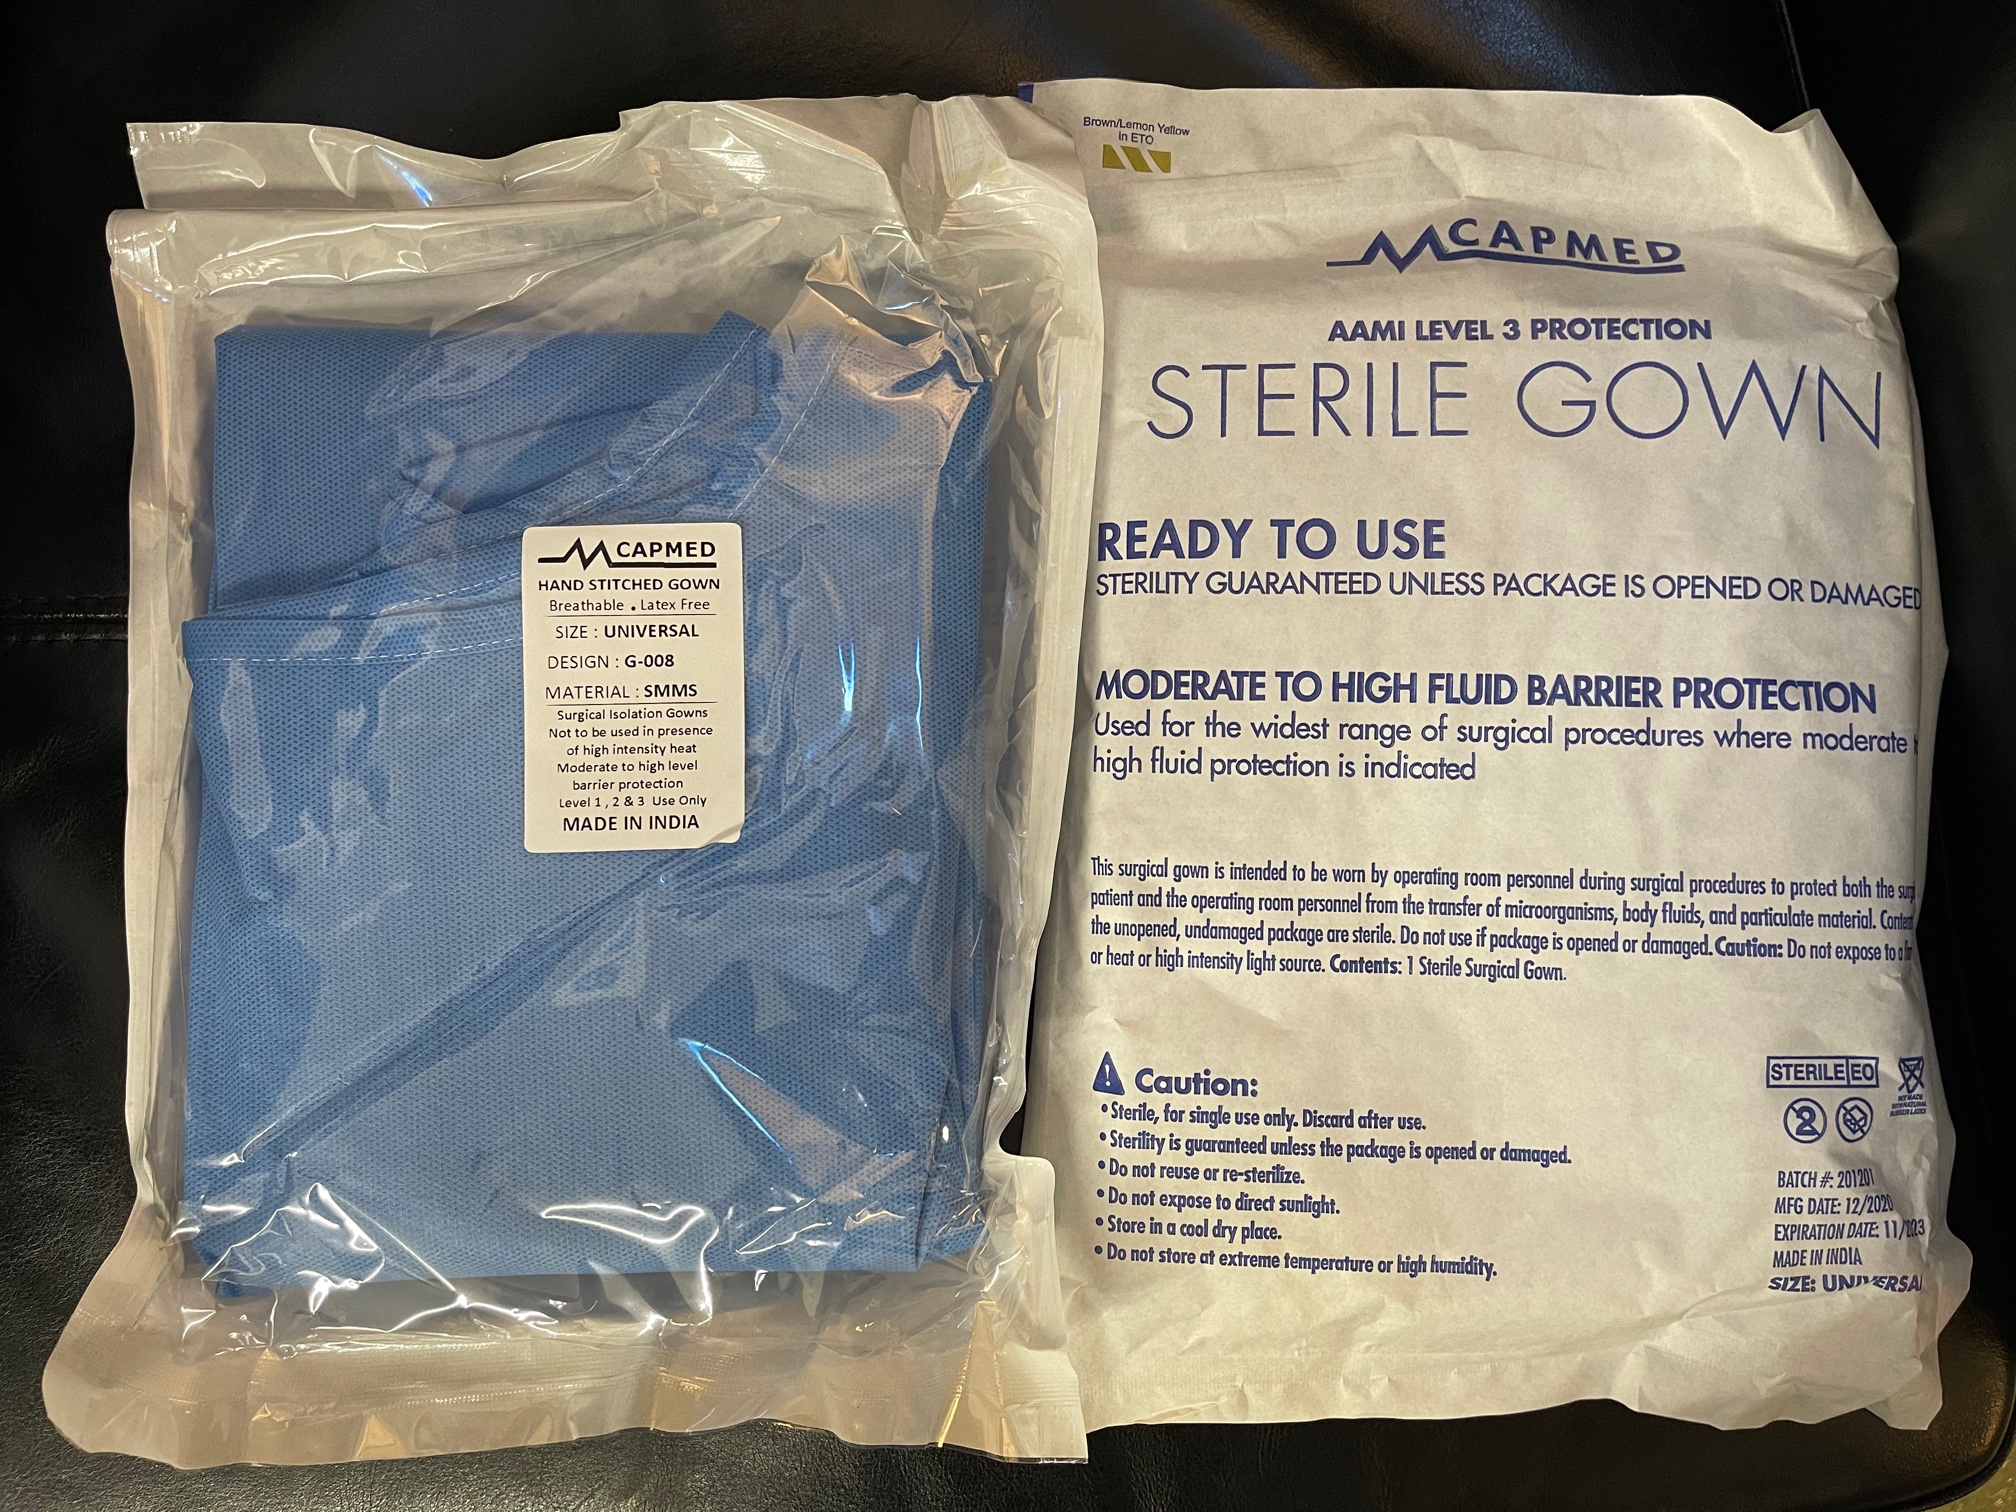 Disposable Surgical Gown, Sterile - DS625 | Disposable Surgical Gown,  Sterile - DS625 Suppliers | Disposable Surgical Gown, Sterile - DS625  Manufacturer | Disposable Surgical Gown, Sterile - DS625 Products India